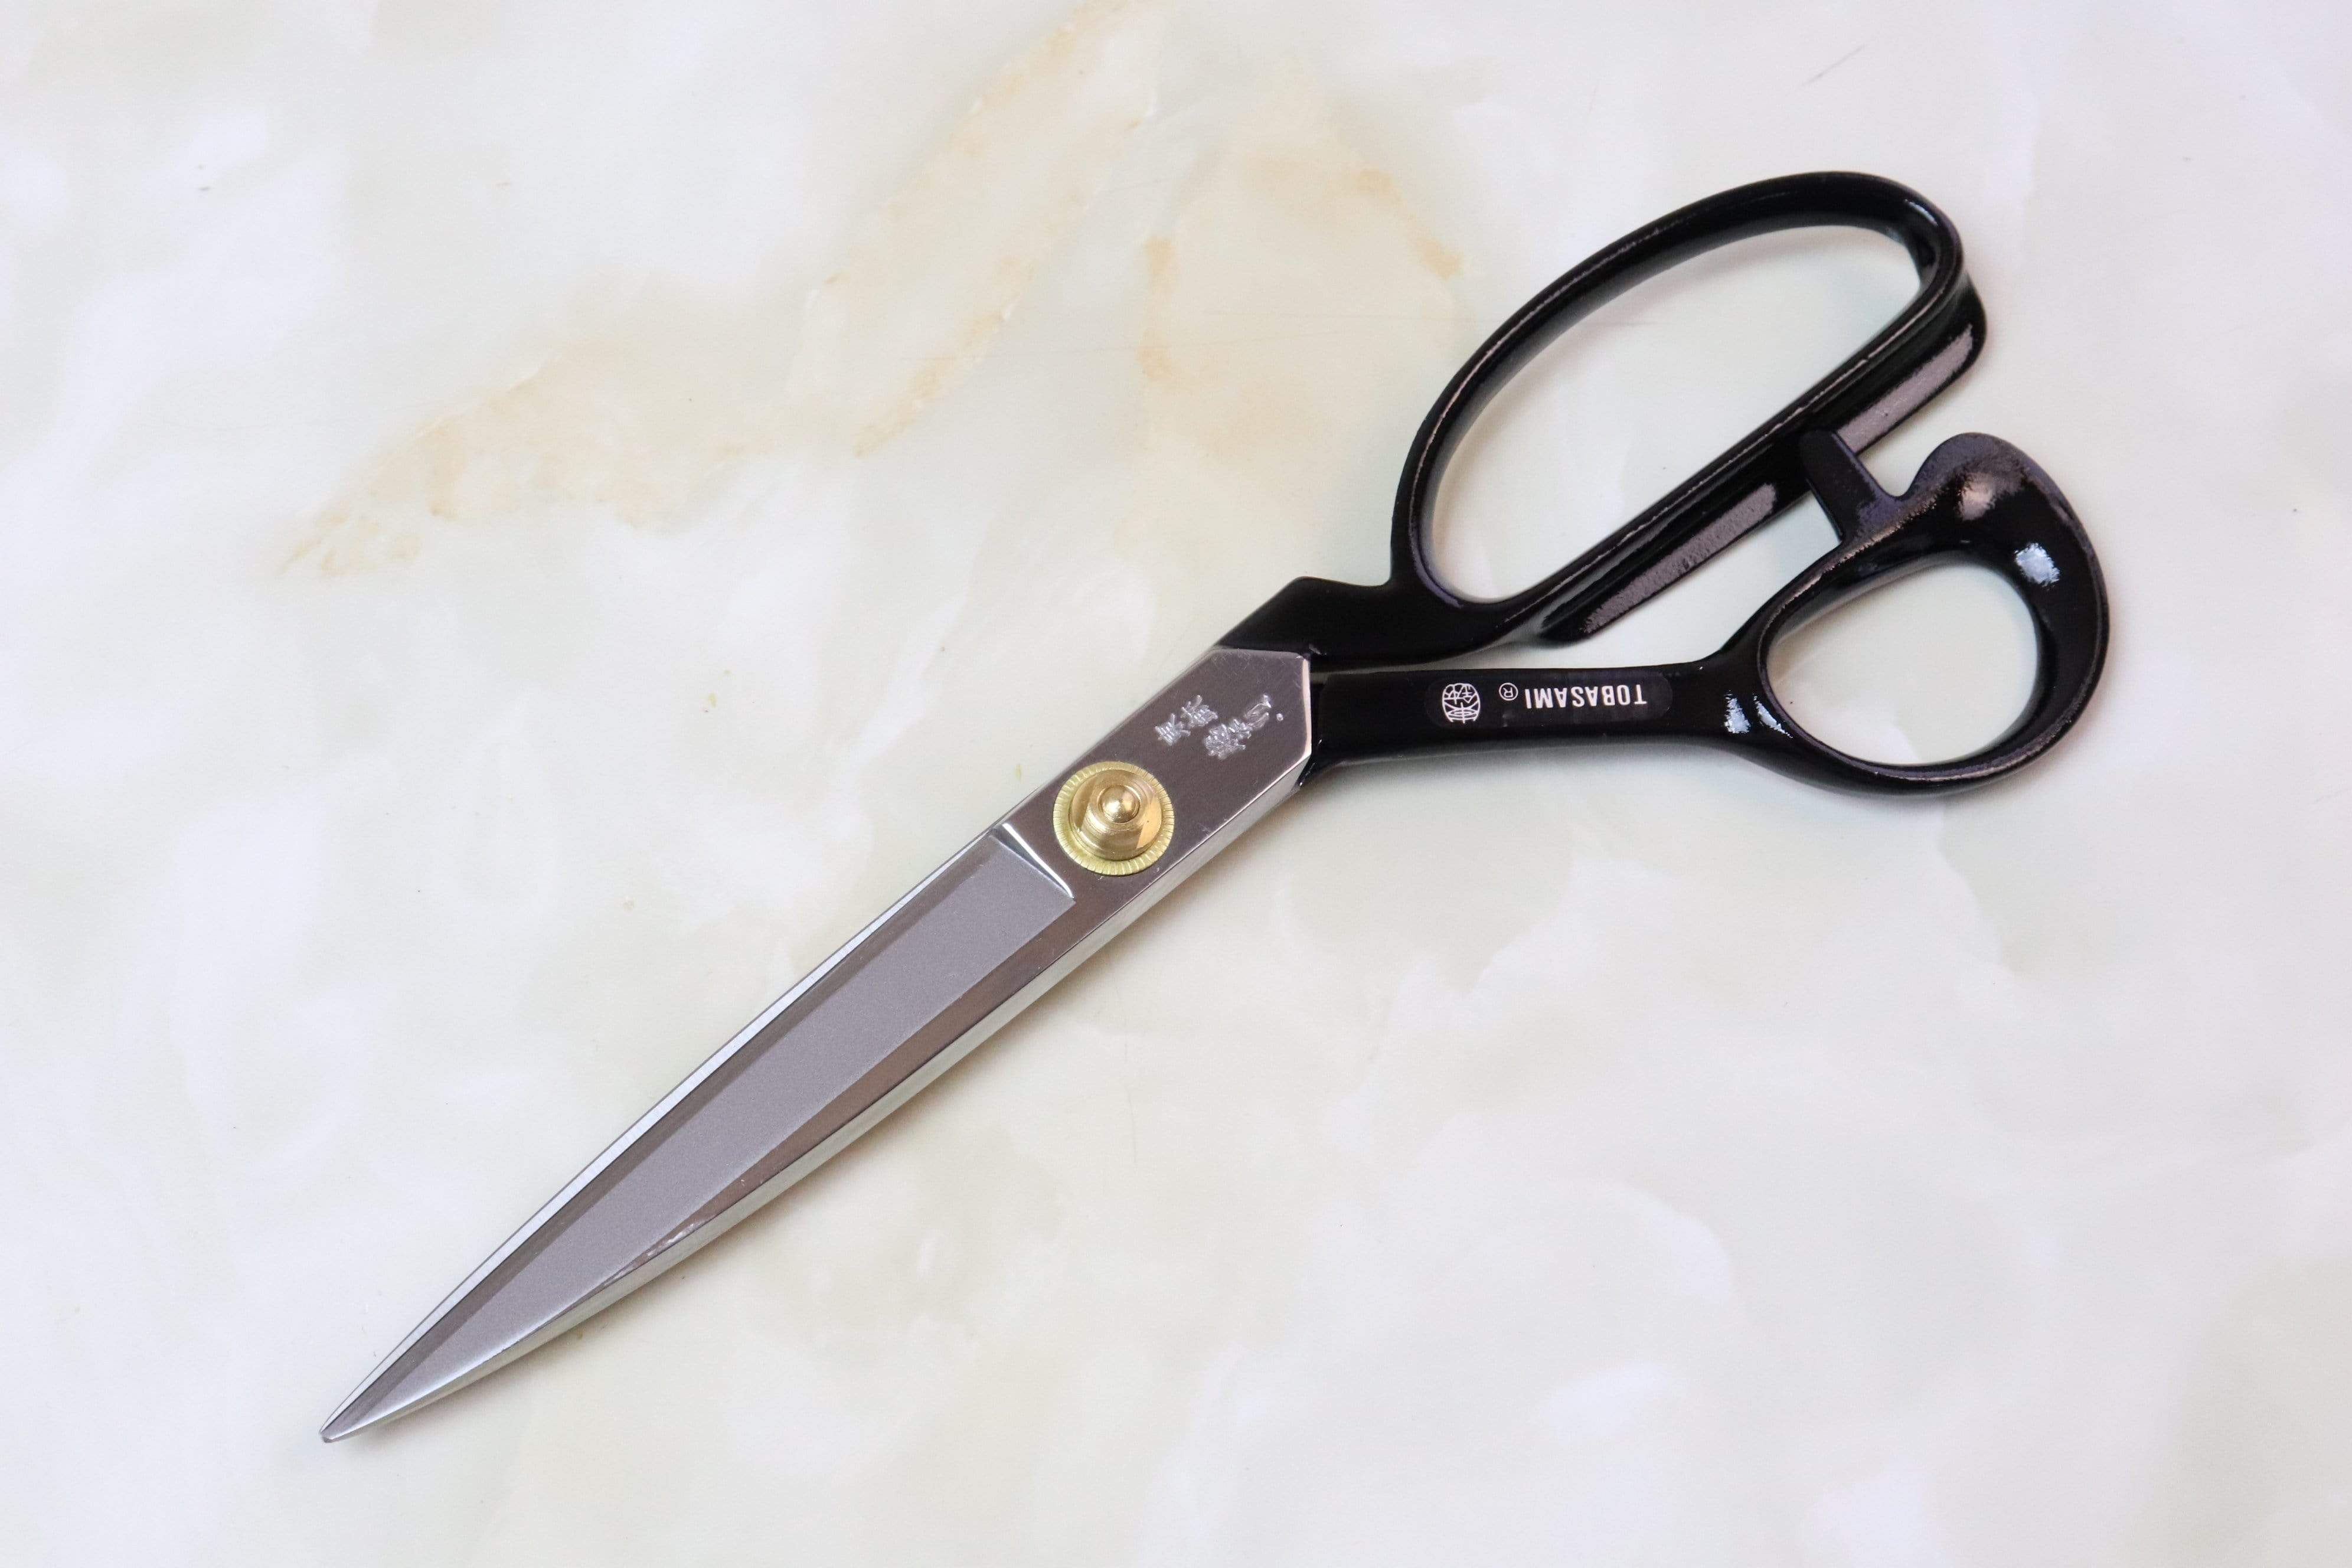 Professional Quality 10 inch Hand Forged High Carbon Steel Tailor Scissor Shears for